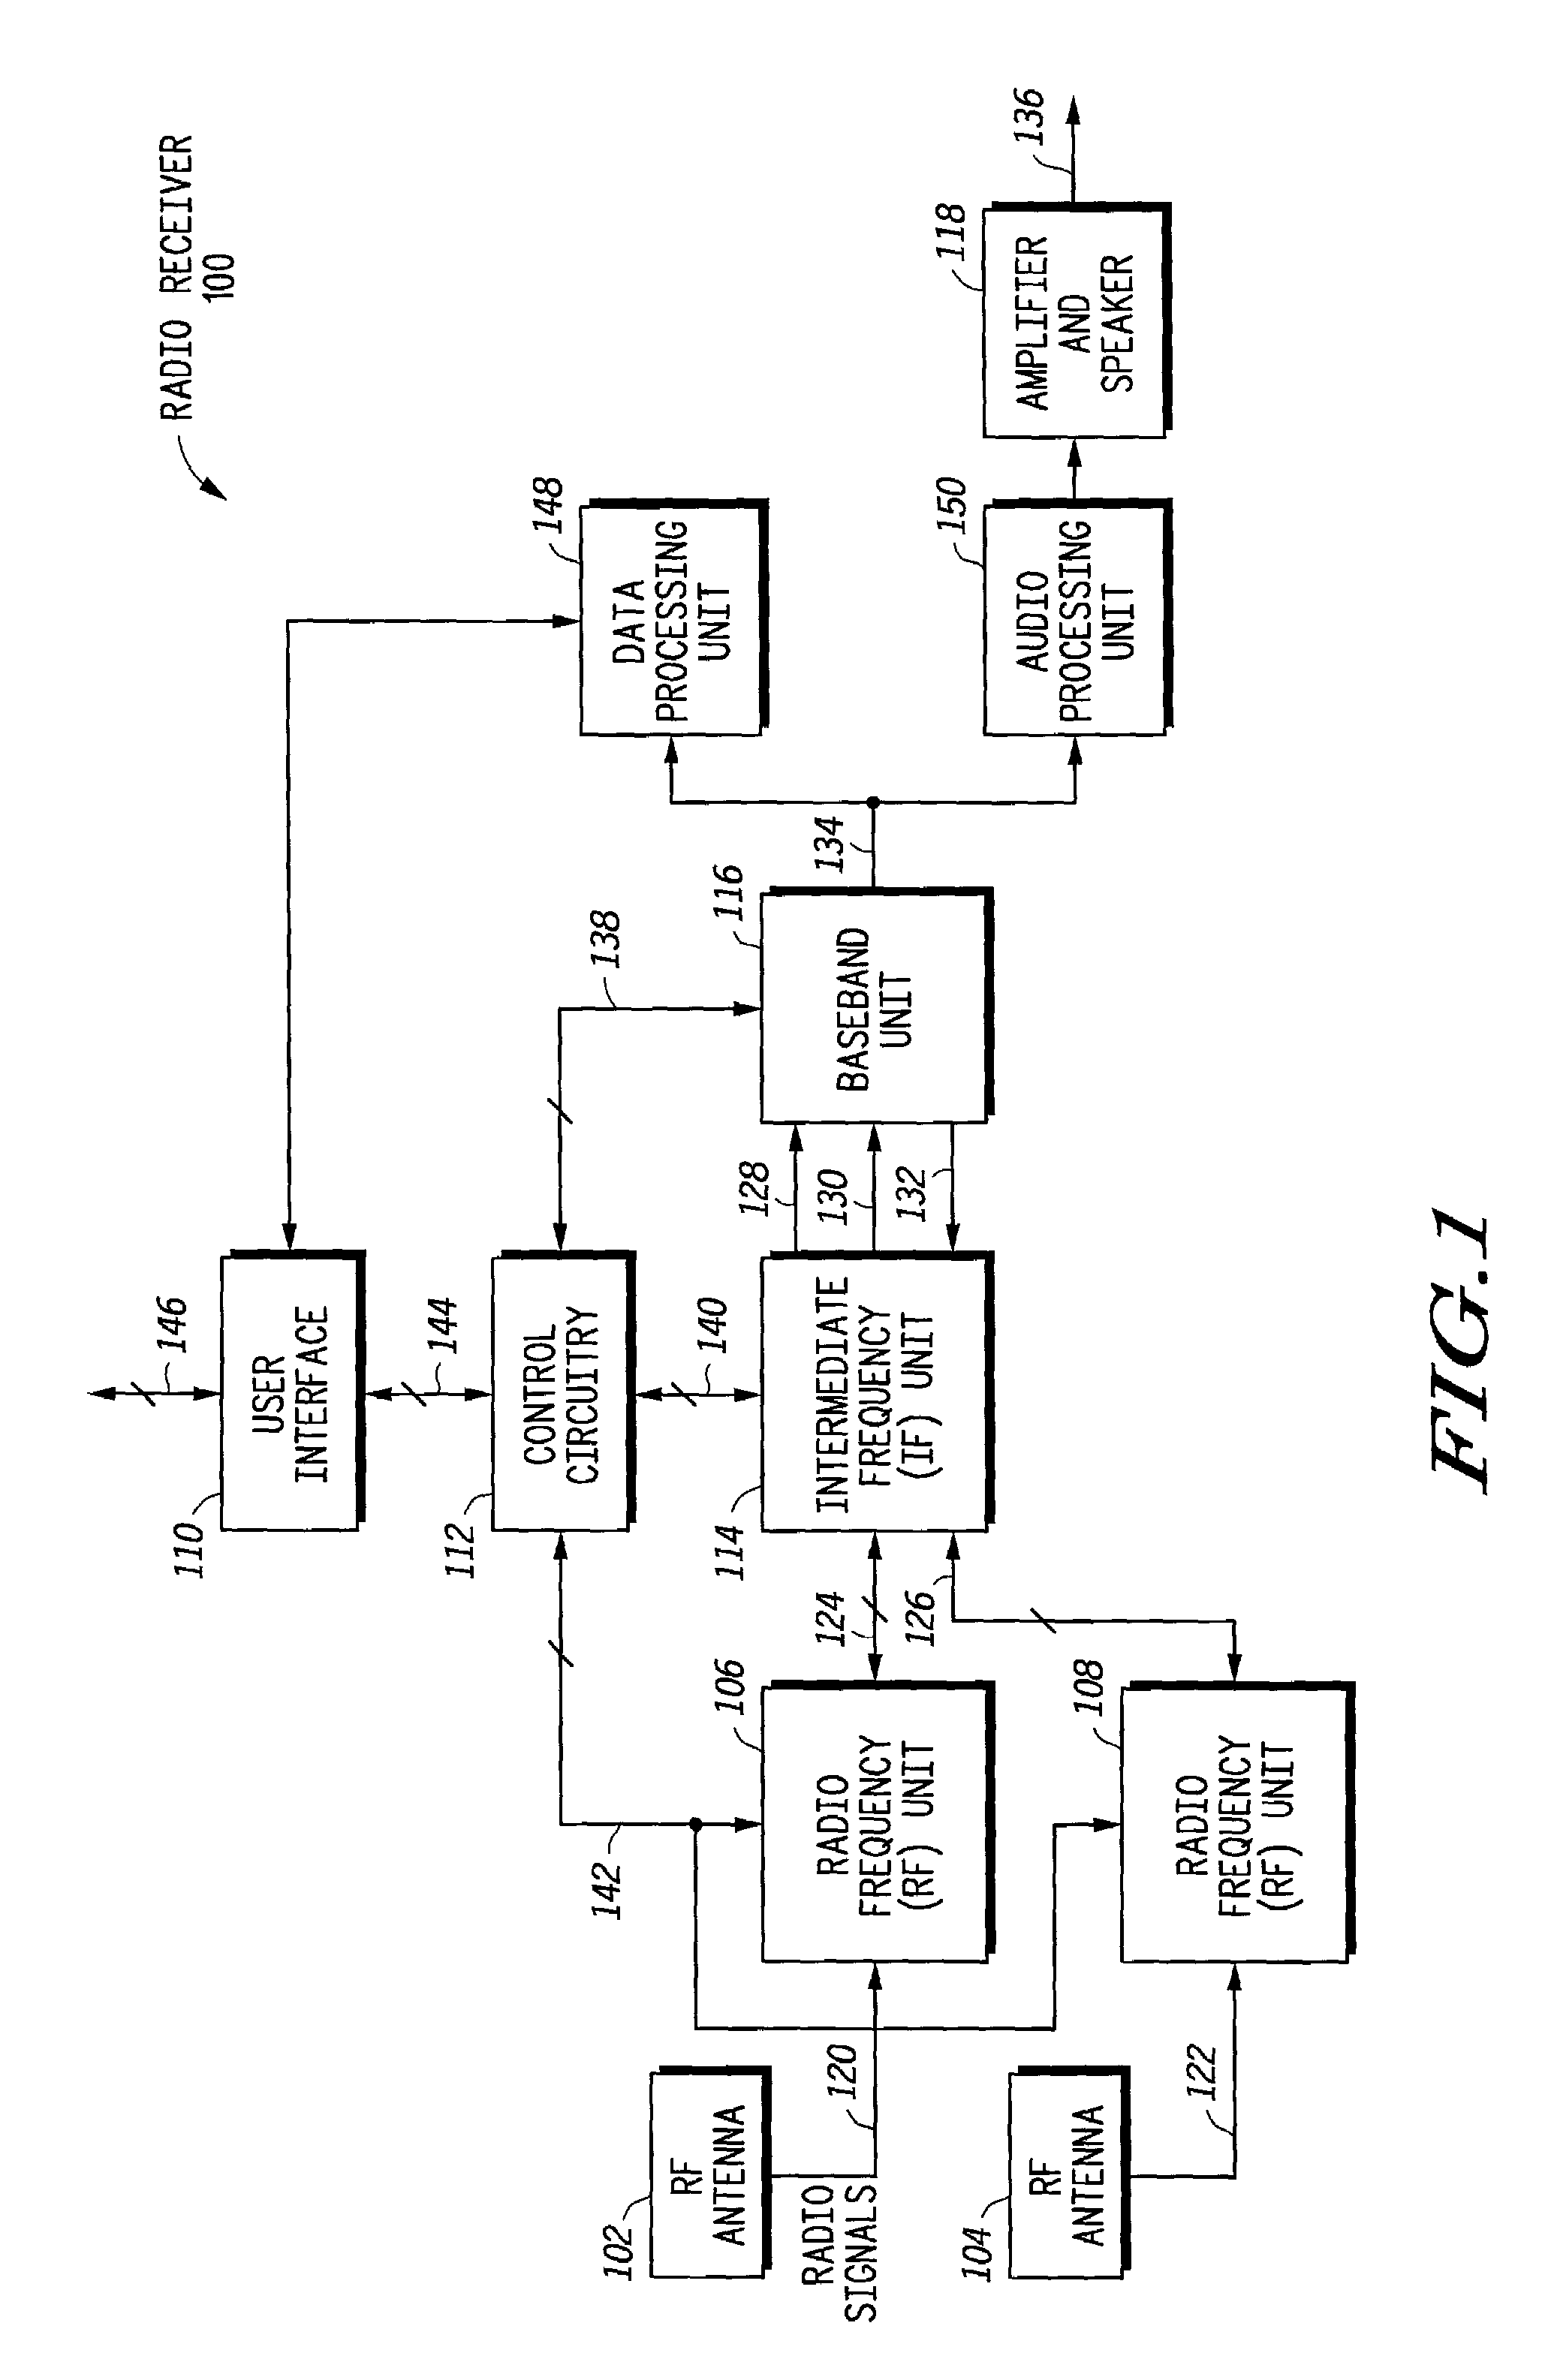 Radio receiver having an adaptive equalizer and method therefor